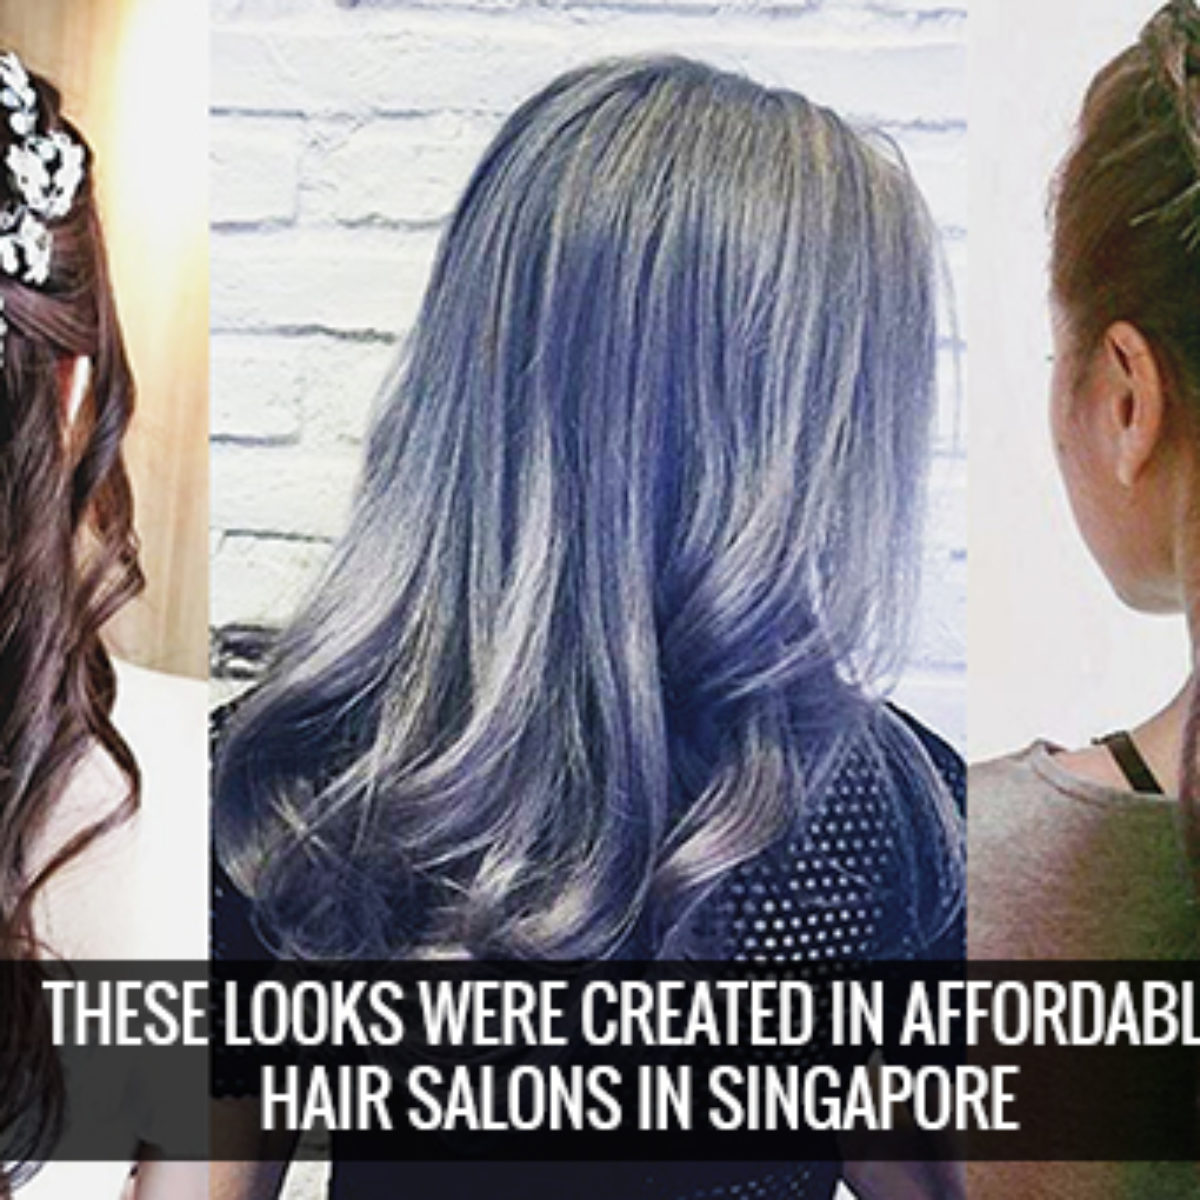 10 Affordable Hair Salons From 8 Haircut To Get Pinterest